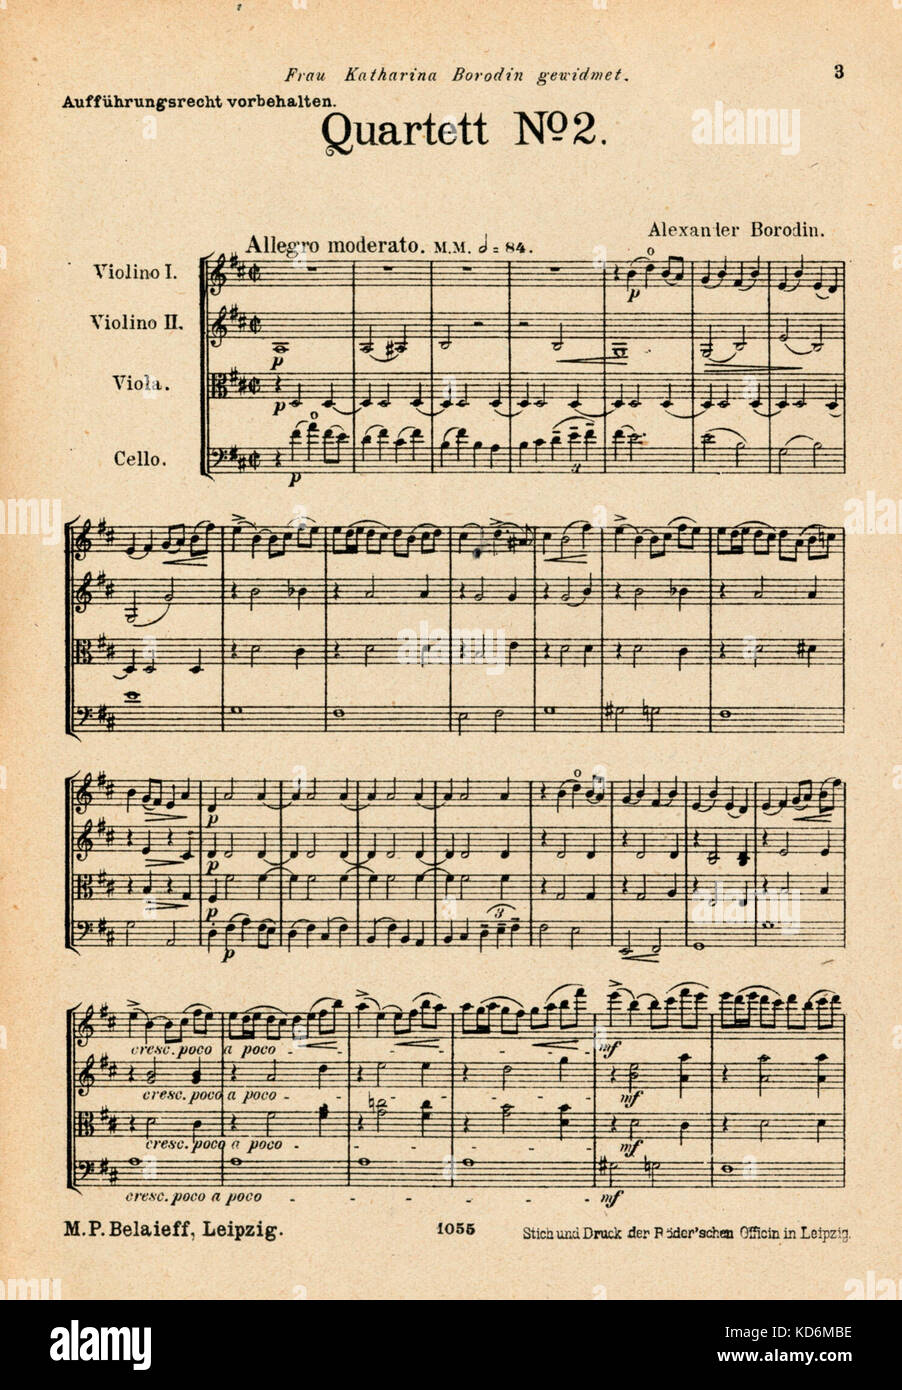 Alexander Borodin - opening page of score for String Quartet No 2 In D Major.  Russian composer & chemist, 12 November 1833 - 27 February 1887. For 2  violins, viola and cello.